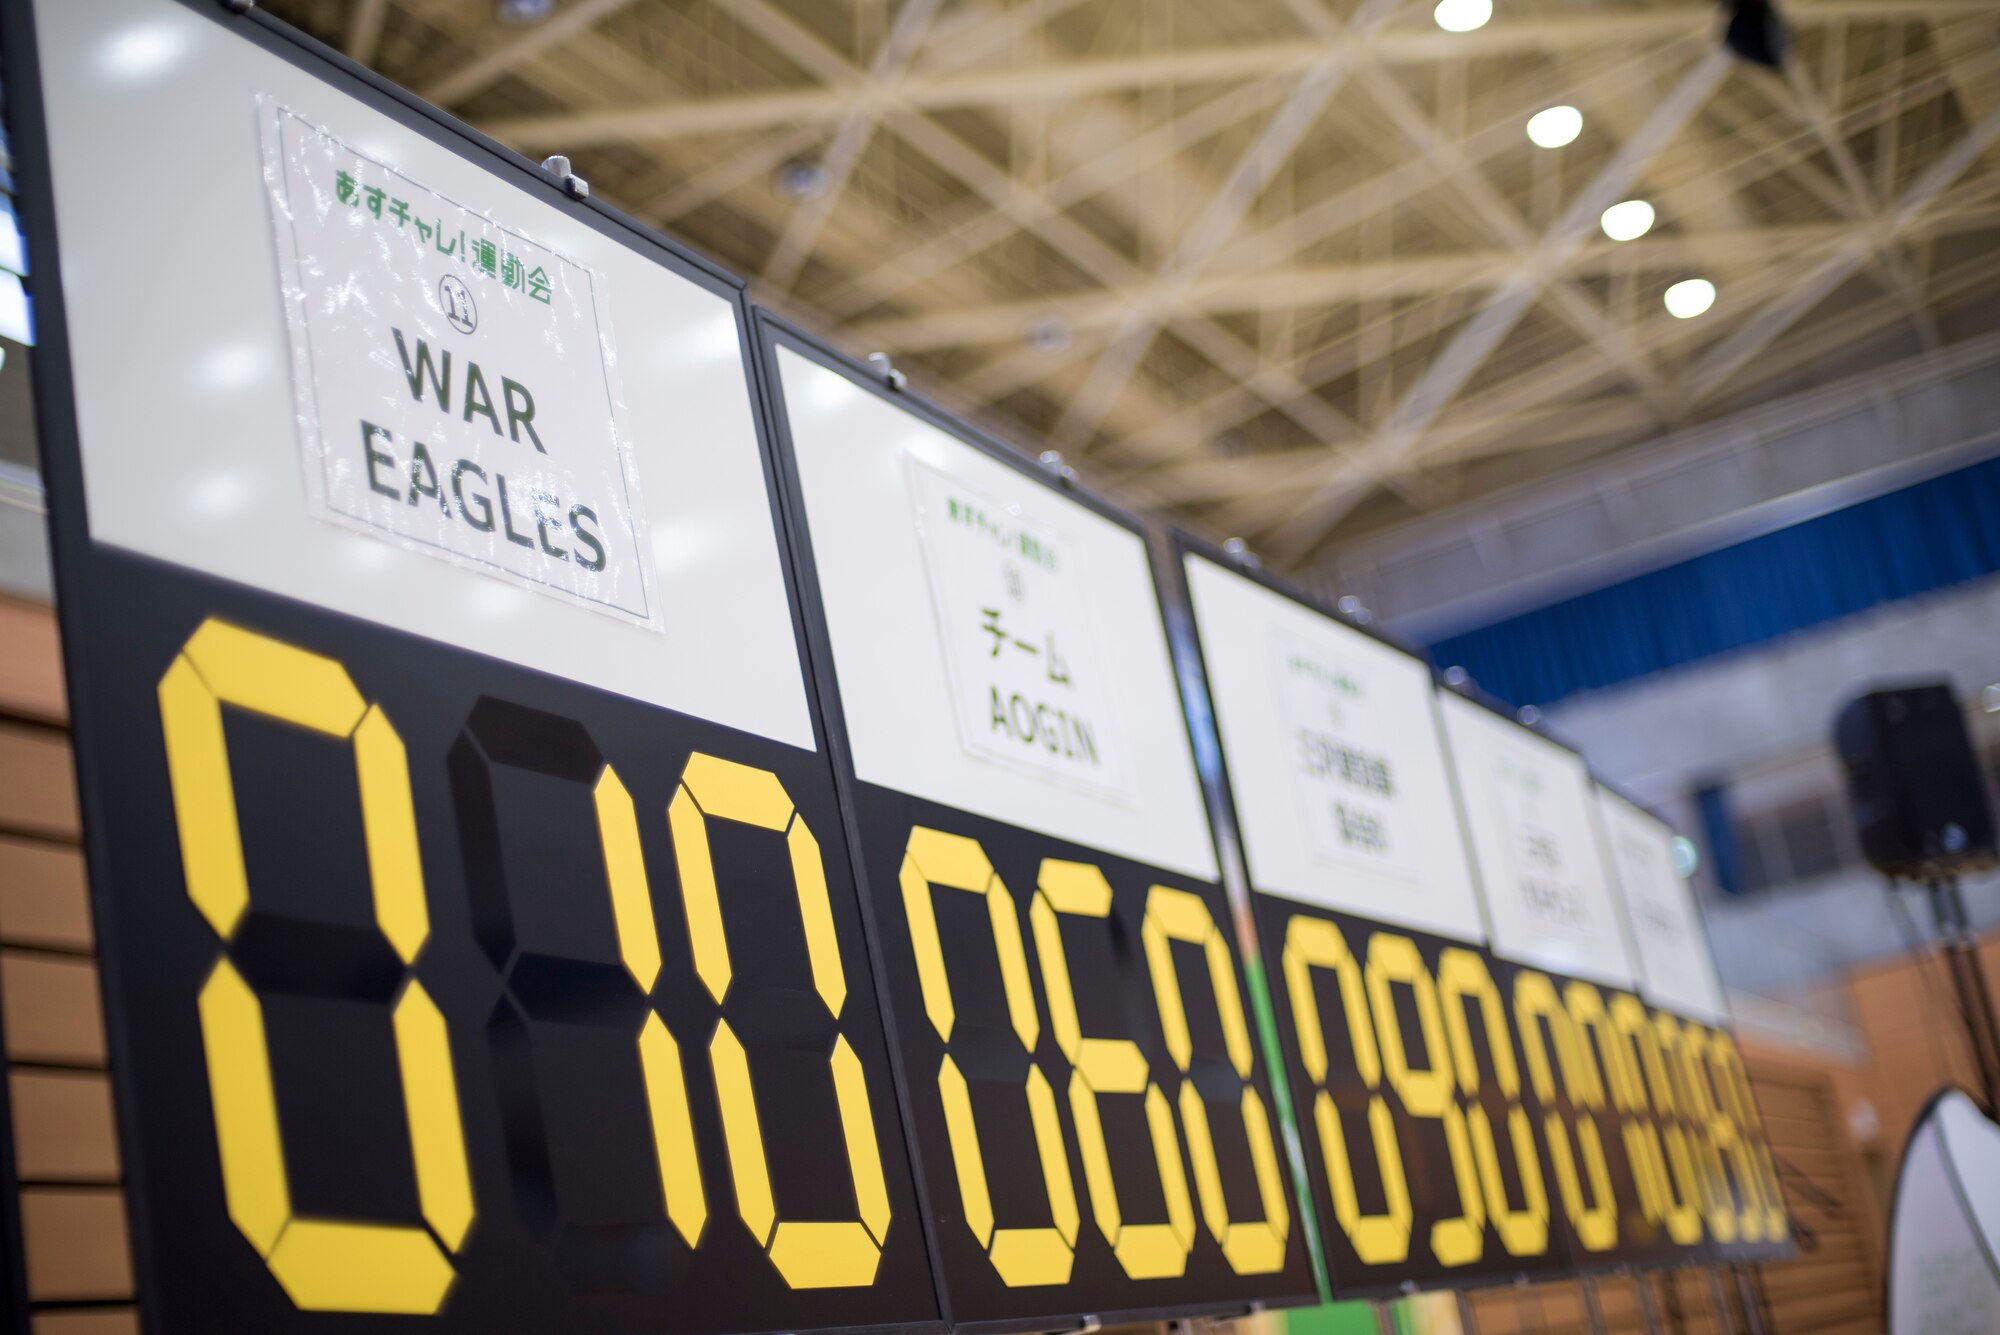 A board displays scores during the Misawa City Paralympics tribute event at the Misawa International Sports Center in Misawa City, Japan, Dec. 1, 2018. Throughout the day, attendees played goal ball and boccia which is a tactical game comparable to shuffle board, wheel chair basketball and sitting volleyball. (U.S. Air Force photo by Airman 1st Class Collette Brooks)